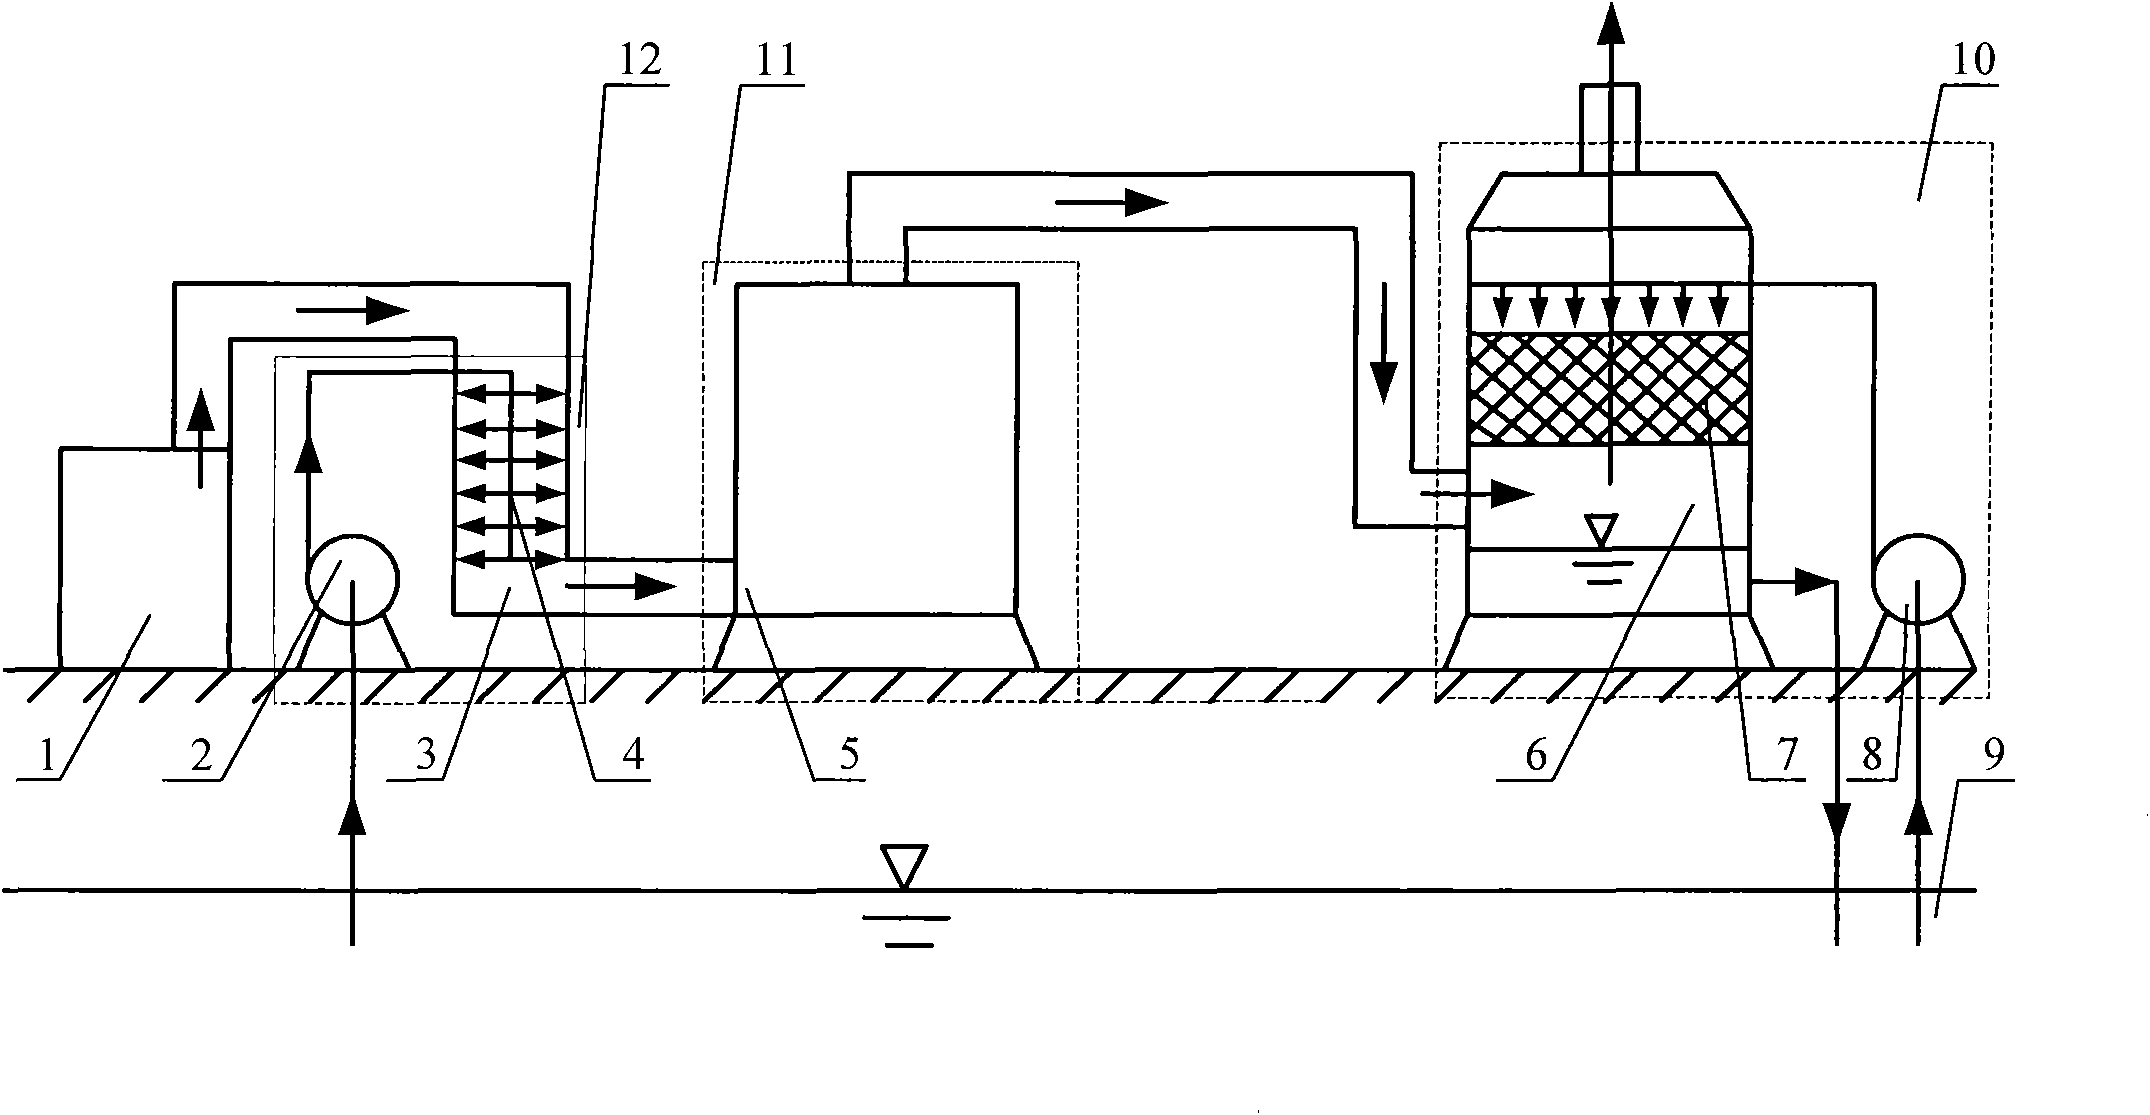 Method for integrated desulfurization and denitration for marine ship exhaust